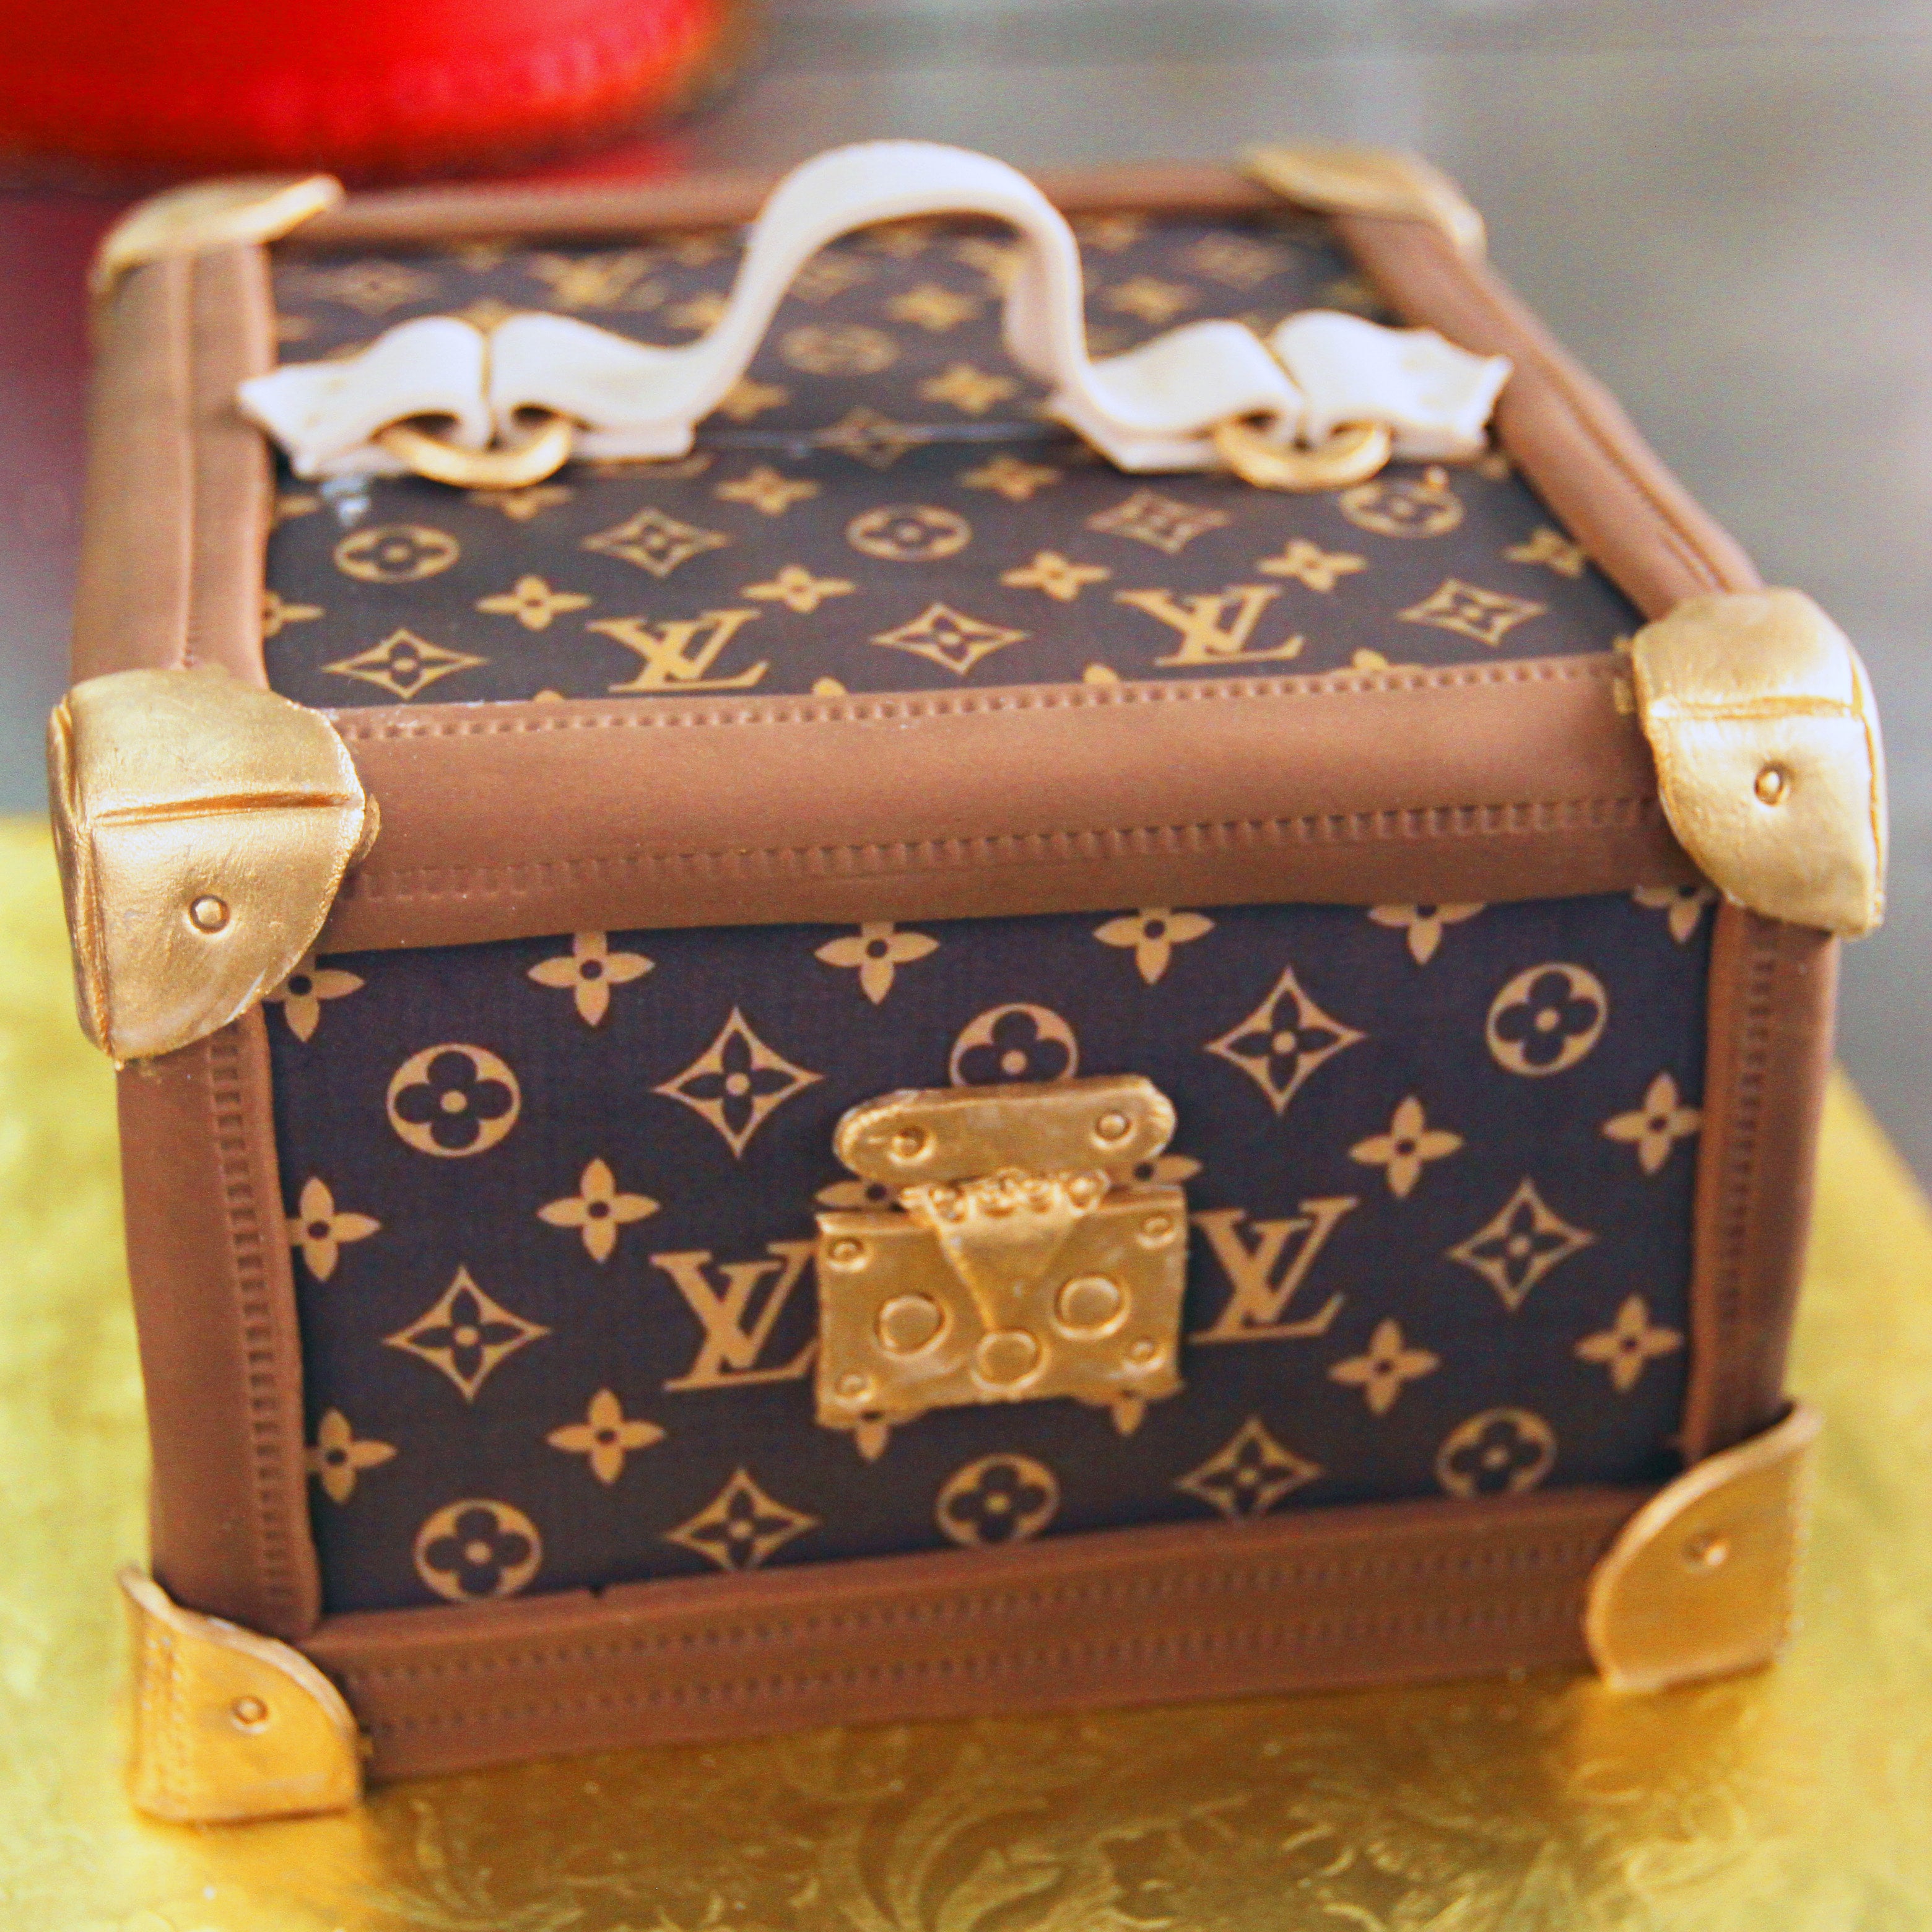 Lv purse cake S/o to my cake family @legendary_king_apparel for always  trusting my vision. It's been years now and you always give me ... |  Instagram